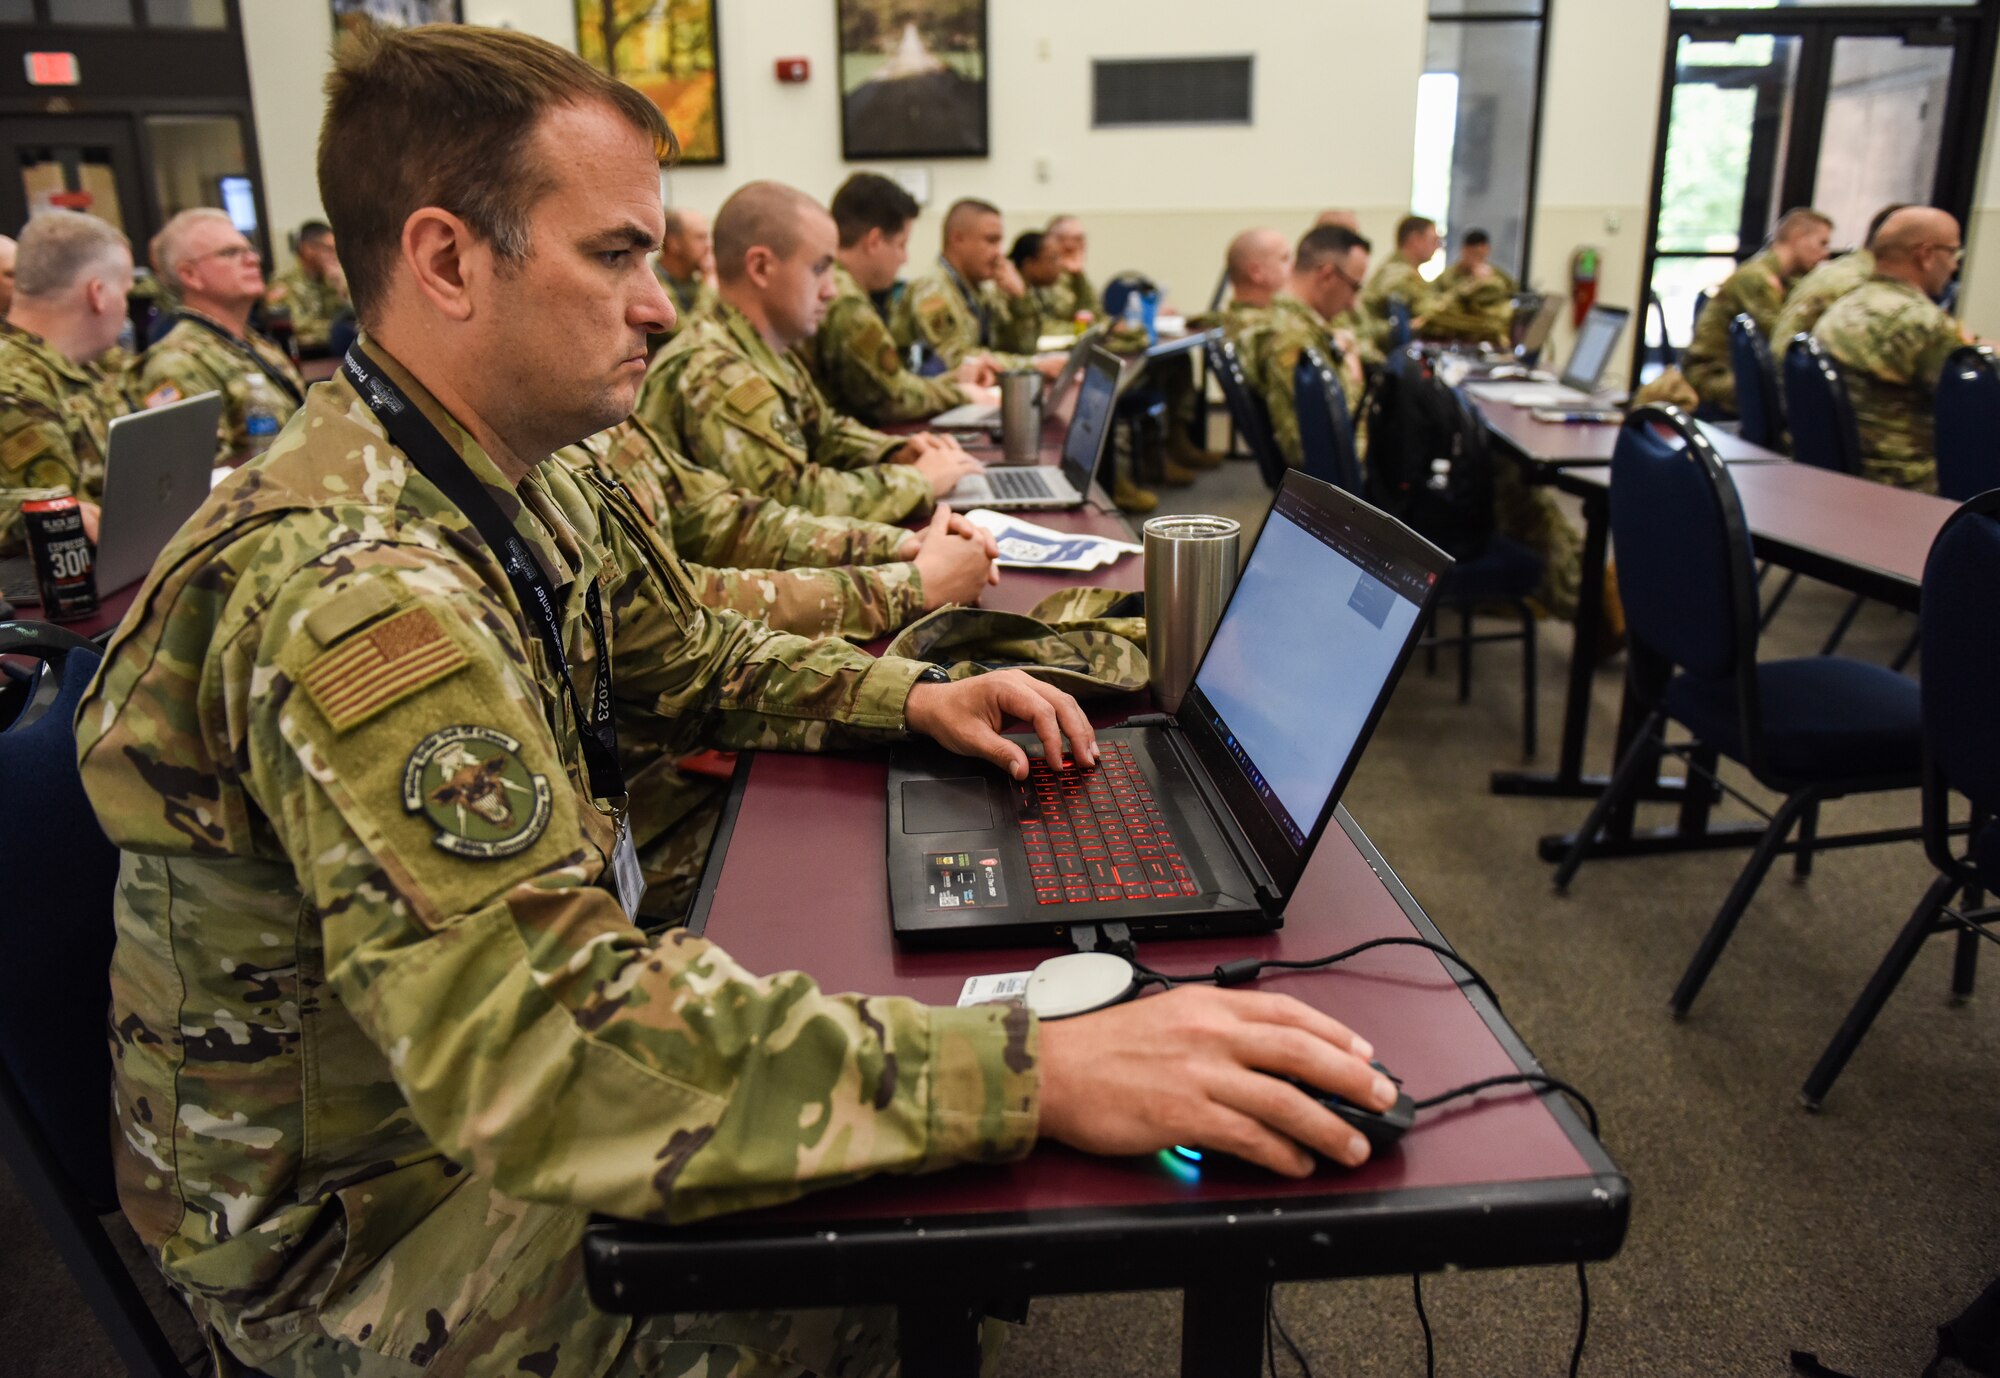 Through the mass of cyber operators and defenders during Cyber Shield 2023, one group of participants held strong even without a traditional cyber background. As blue and red teams battled within the cyber domain, 15 Airmen from the 189th Communications Flight supported the exercise by using skills bridged between the flight and the 223rd Cyberspace Operations Squadron to protect and defend the simulated network.